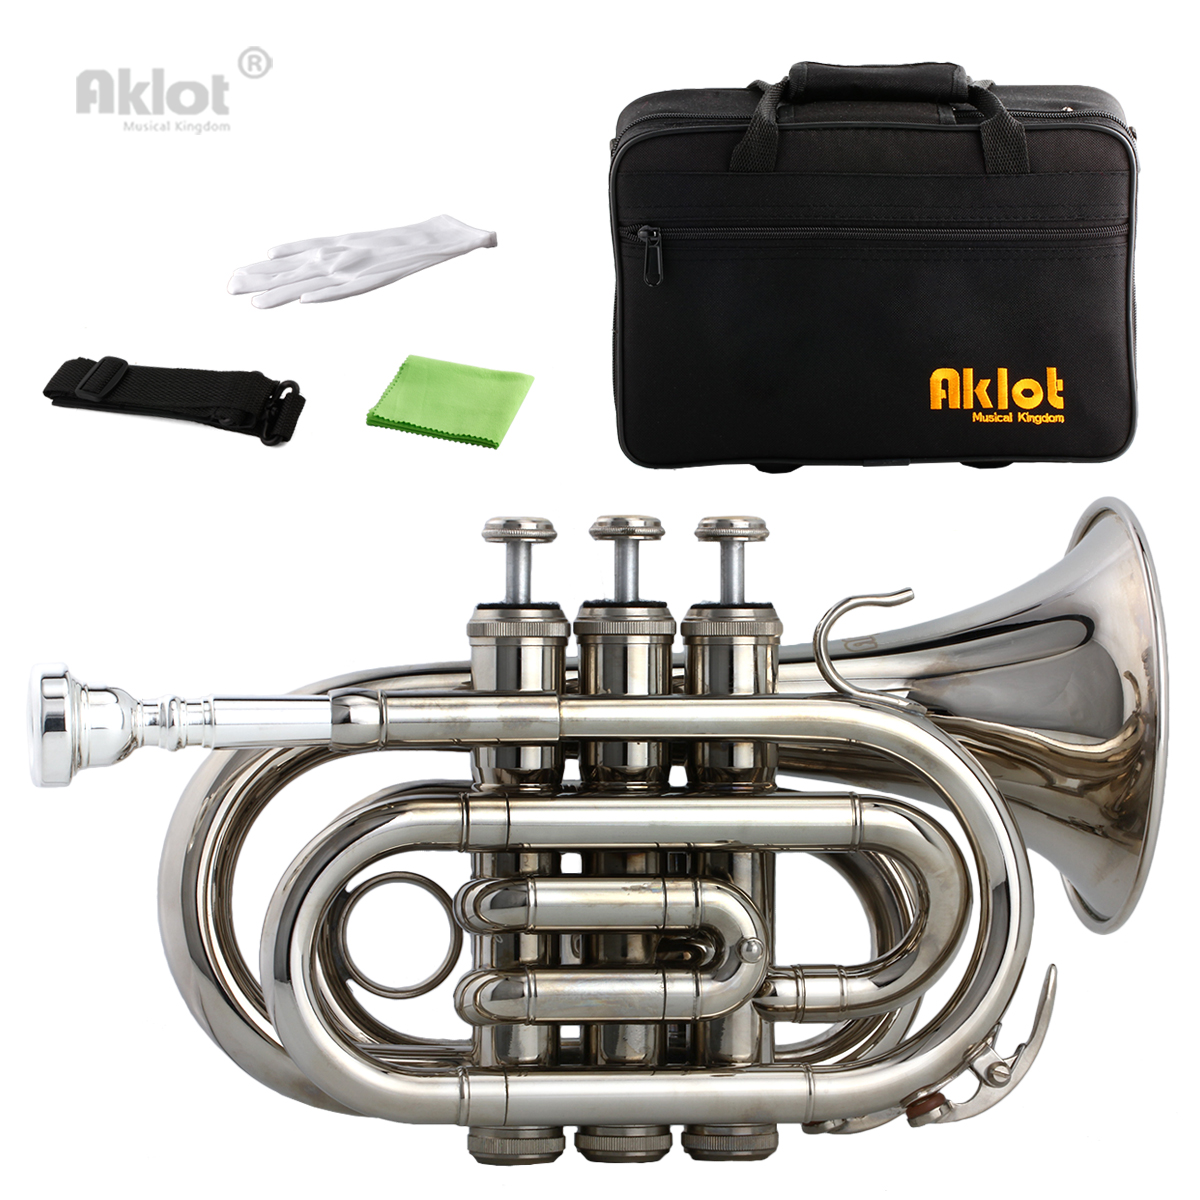 Aklot Bb Mini Pocket Trumpet 7C Silver Plated Mouthpiece Nickel Plated Brass Body with Case